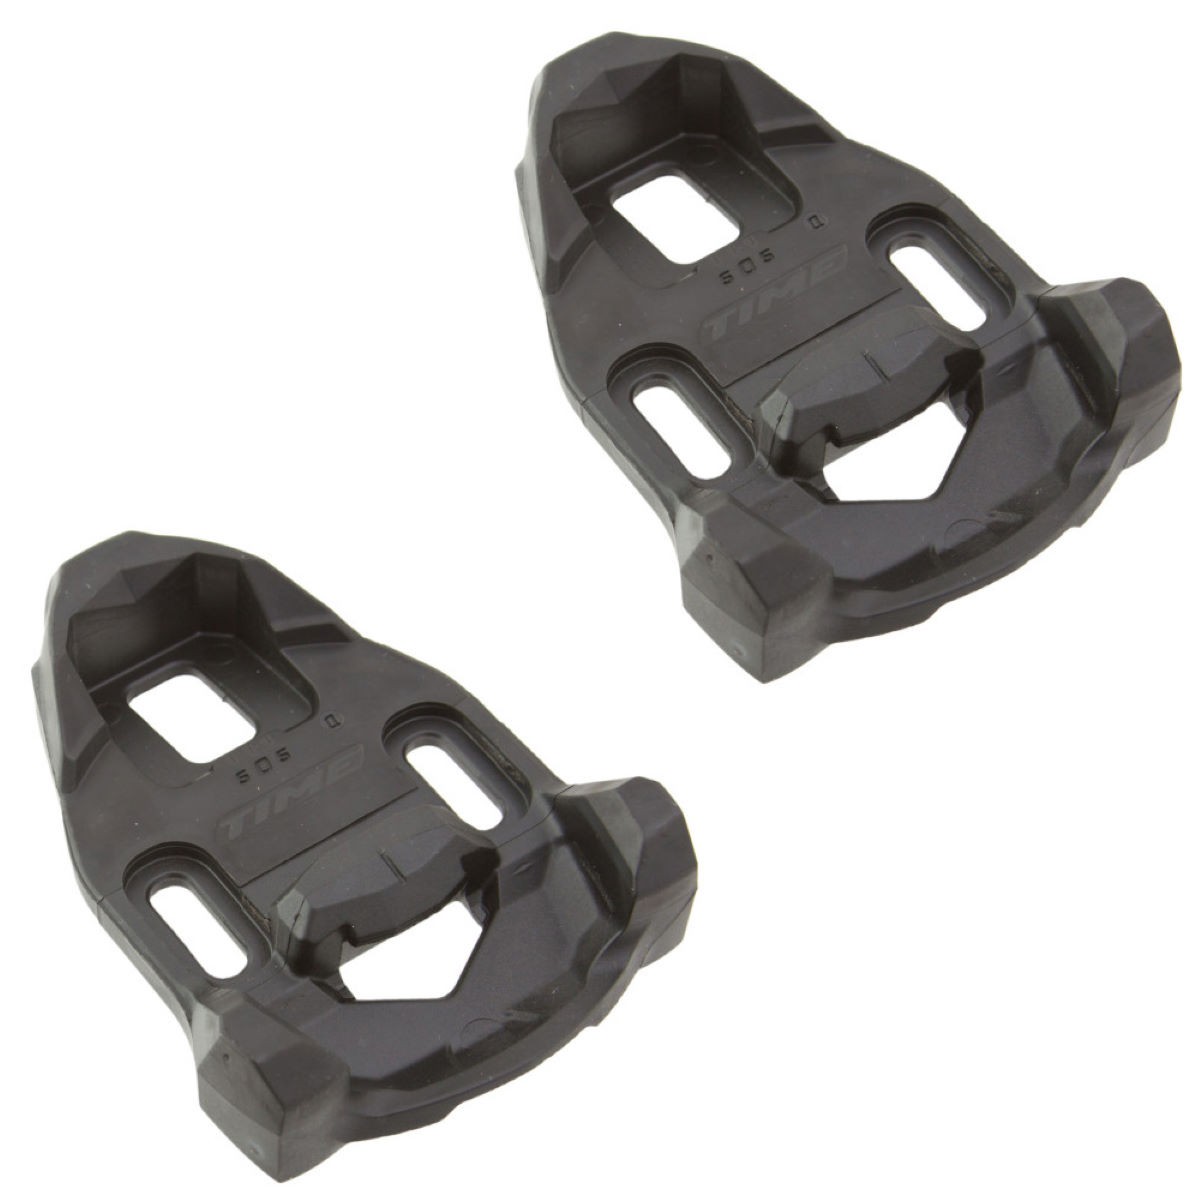 TIME Xpresso 2 Pedals Gray One Size 